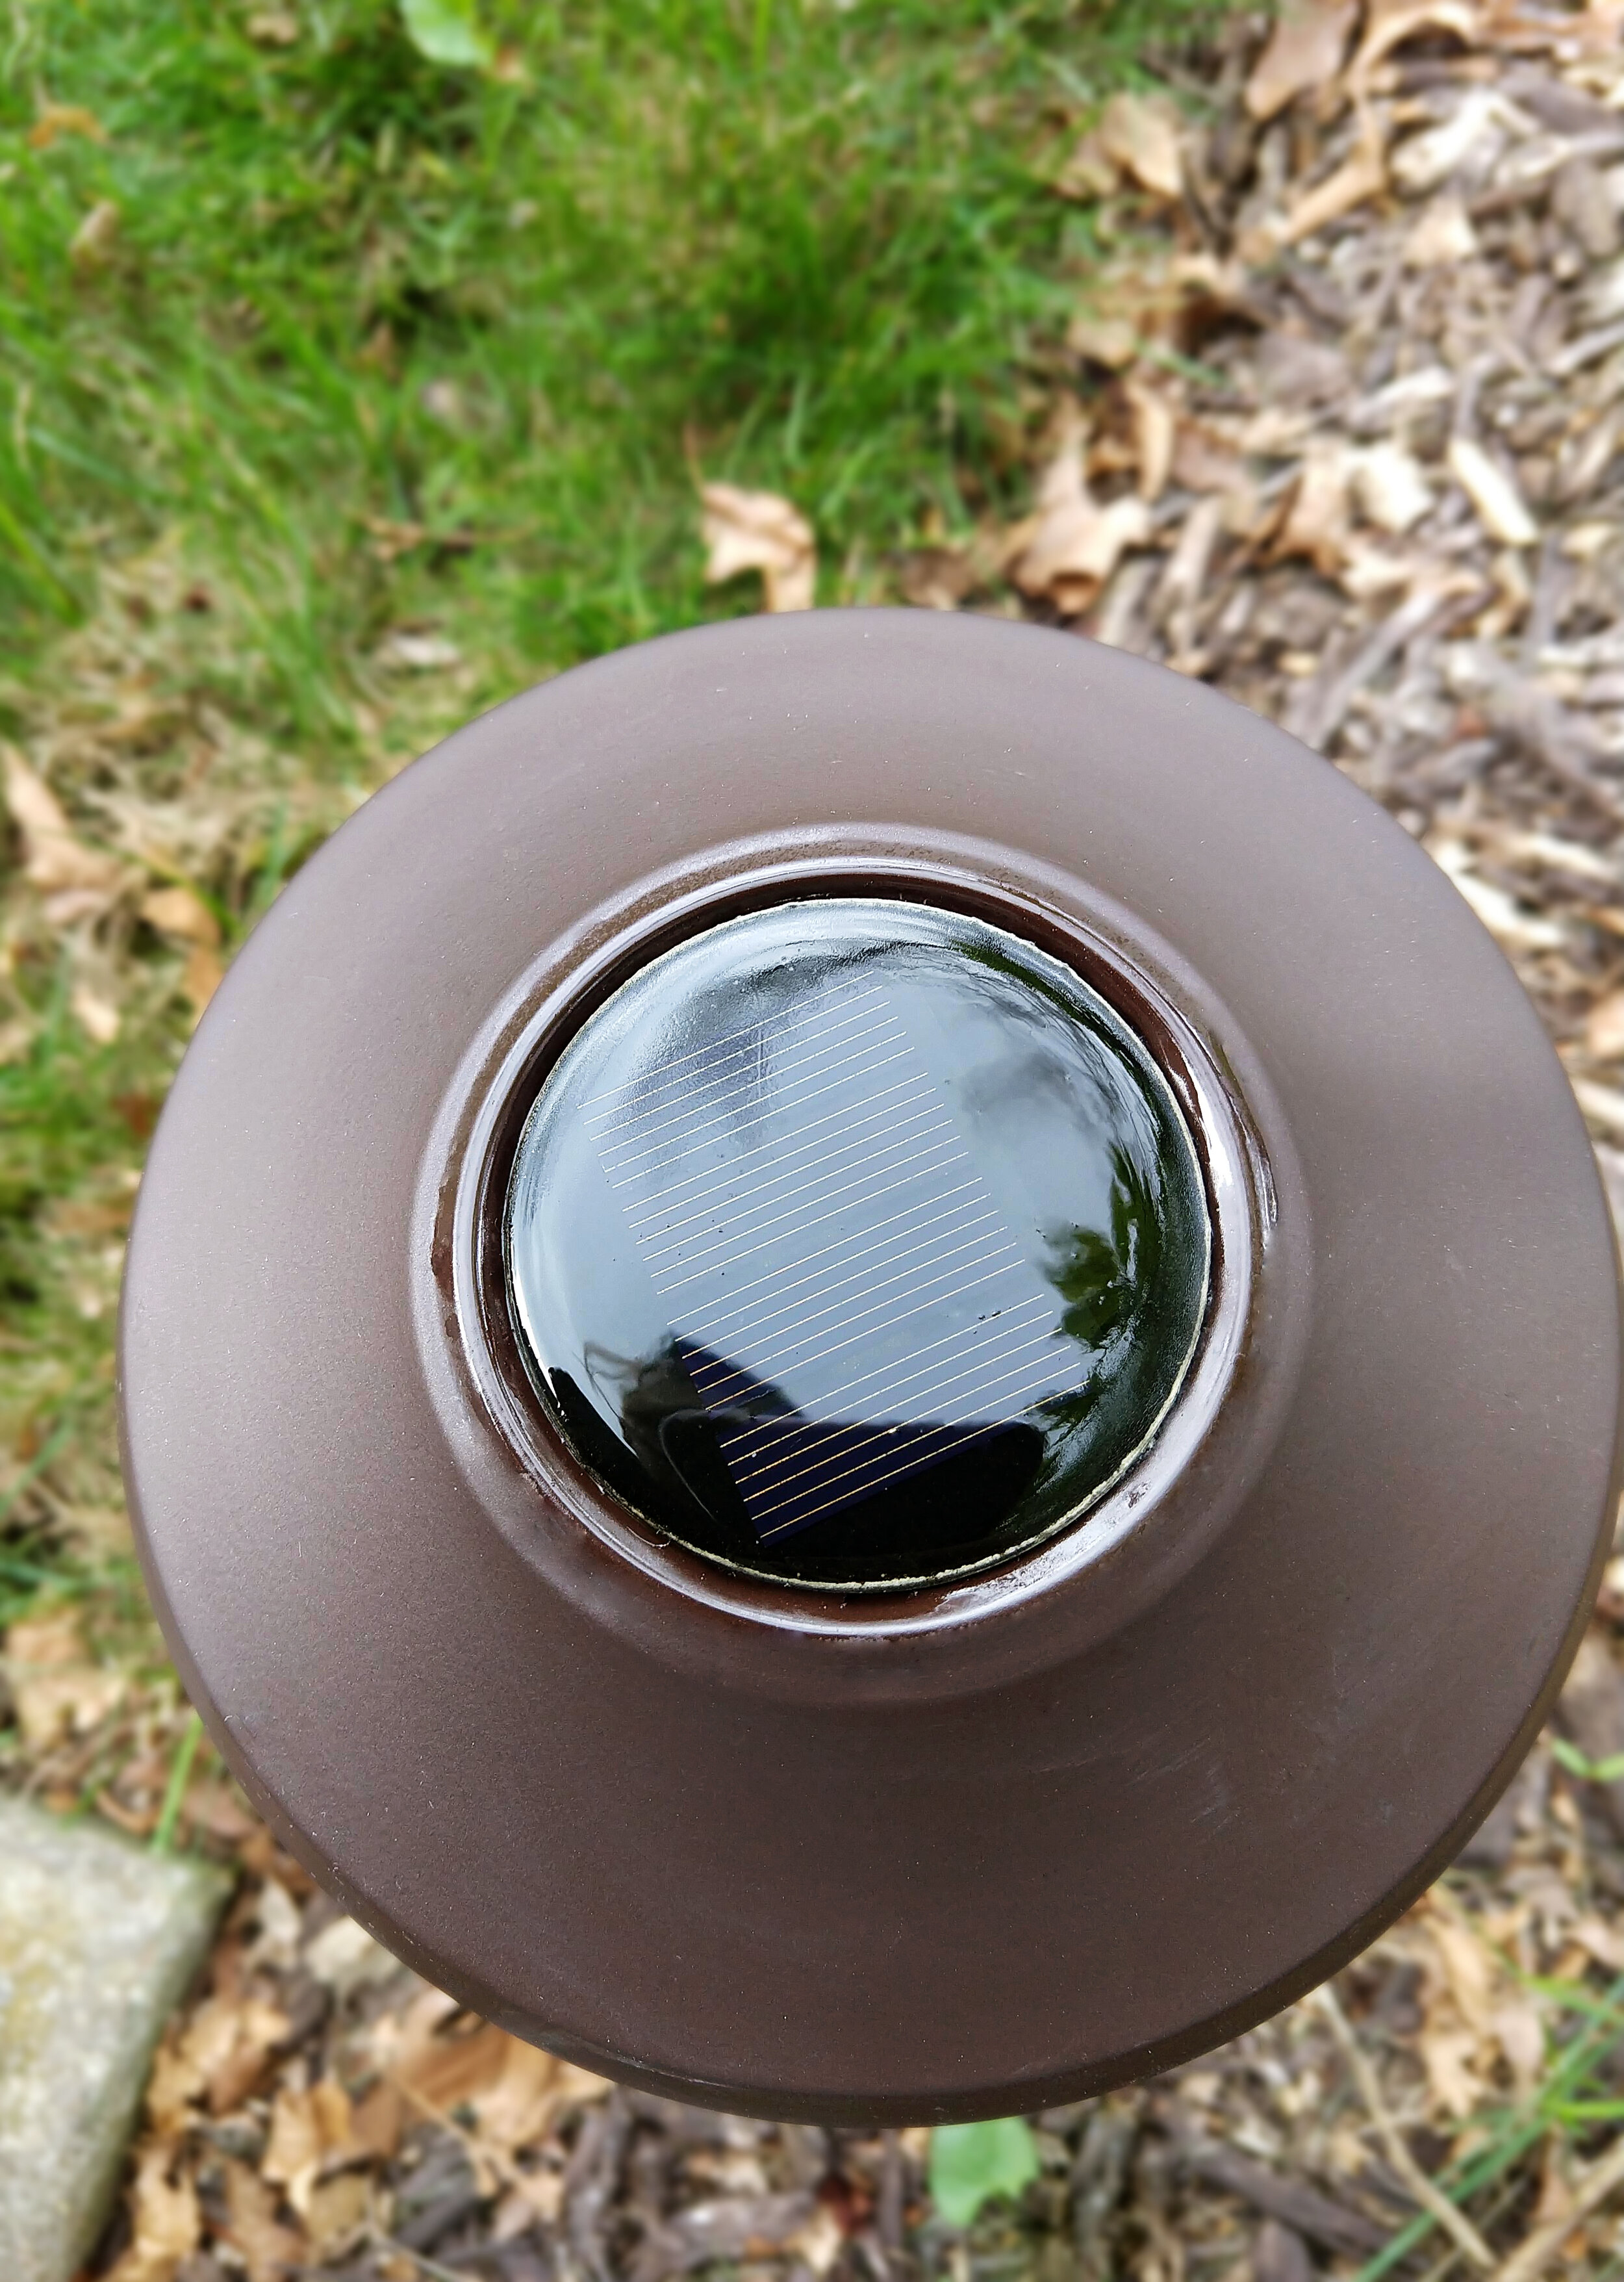 Pictured Above: Solar Light “After” with 3 coats of Rustoleum Clearcoat sealant!